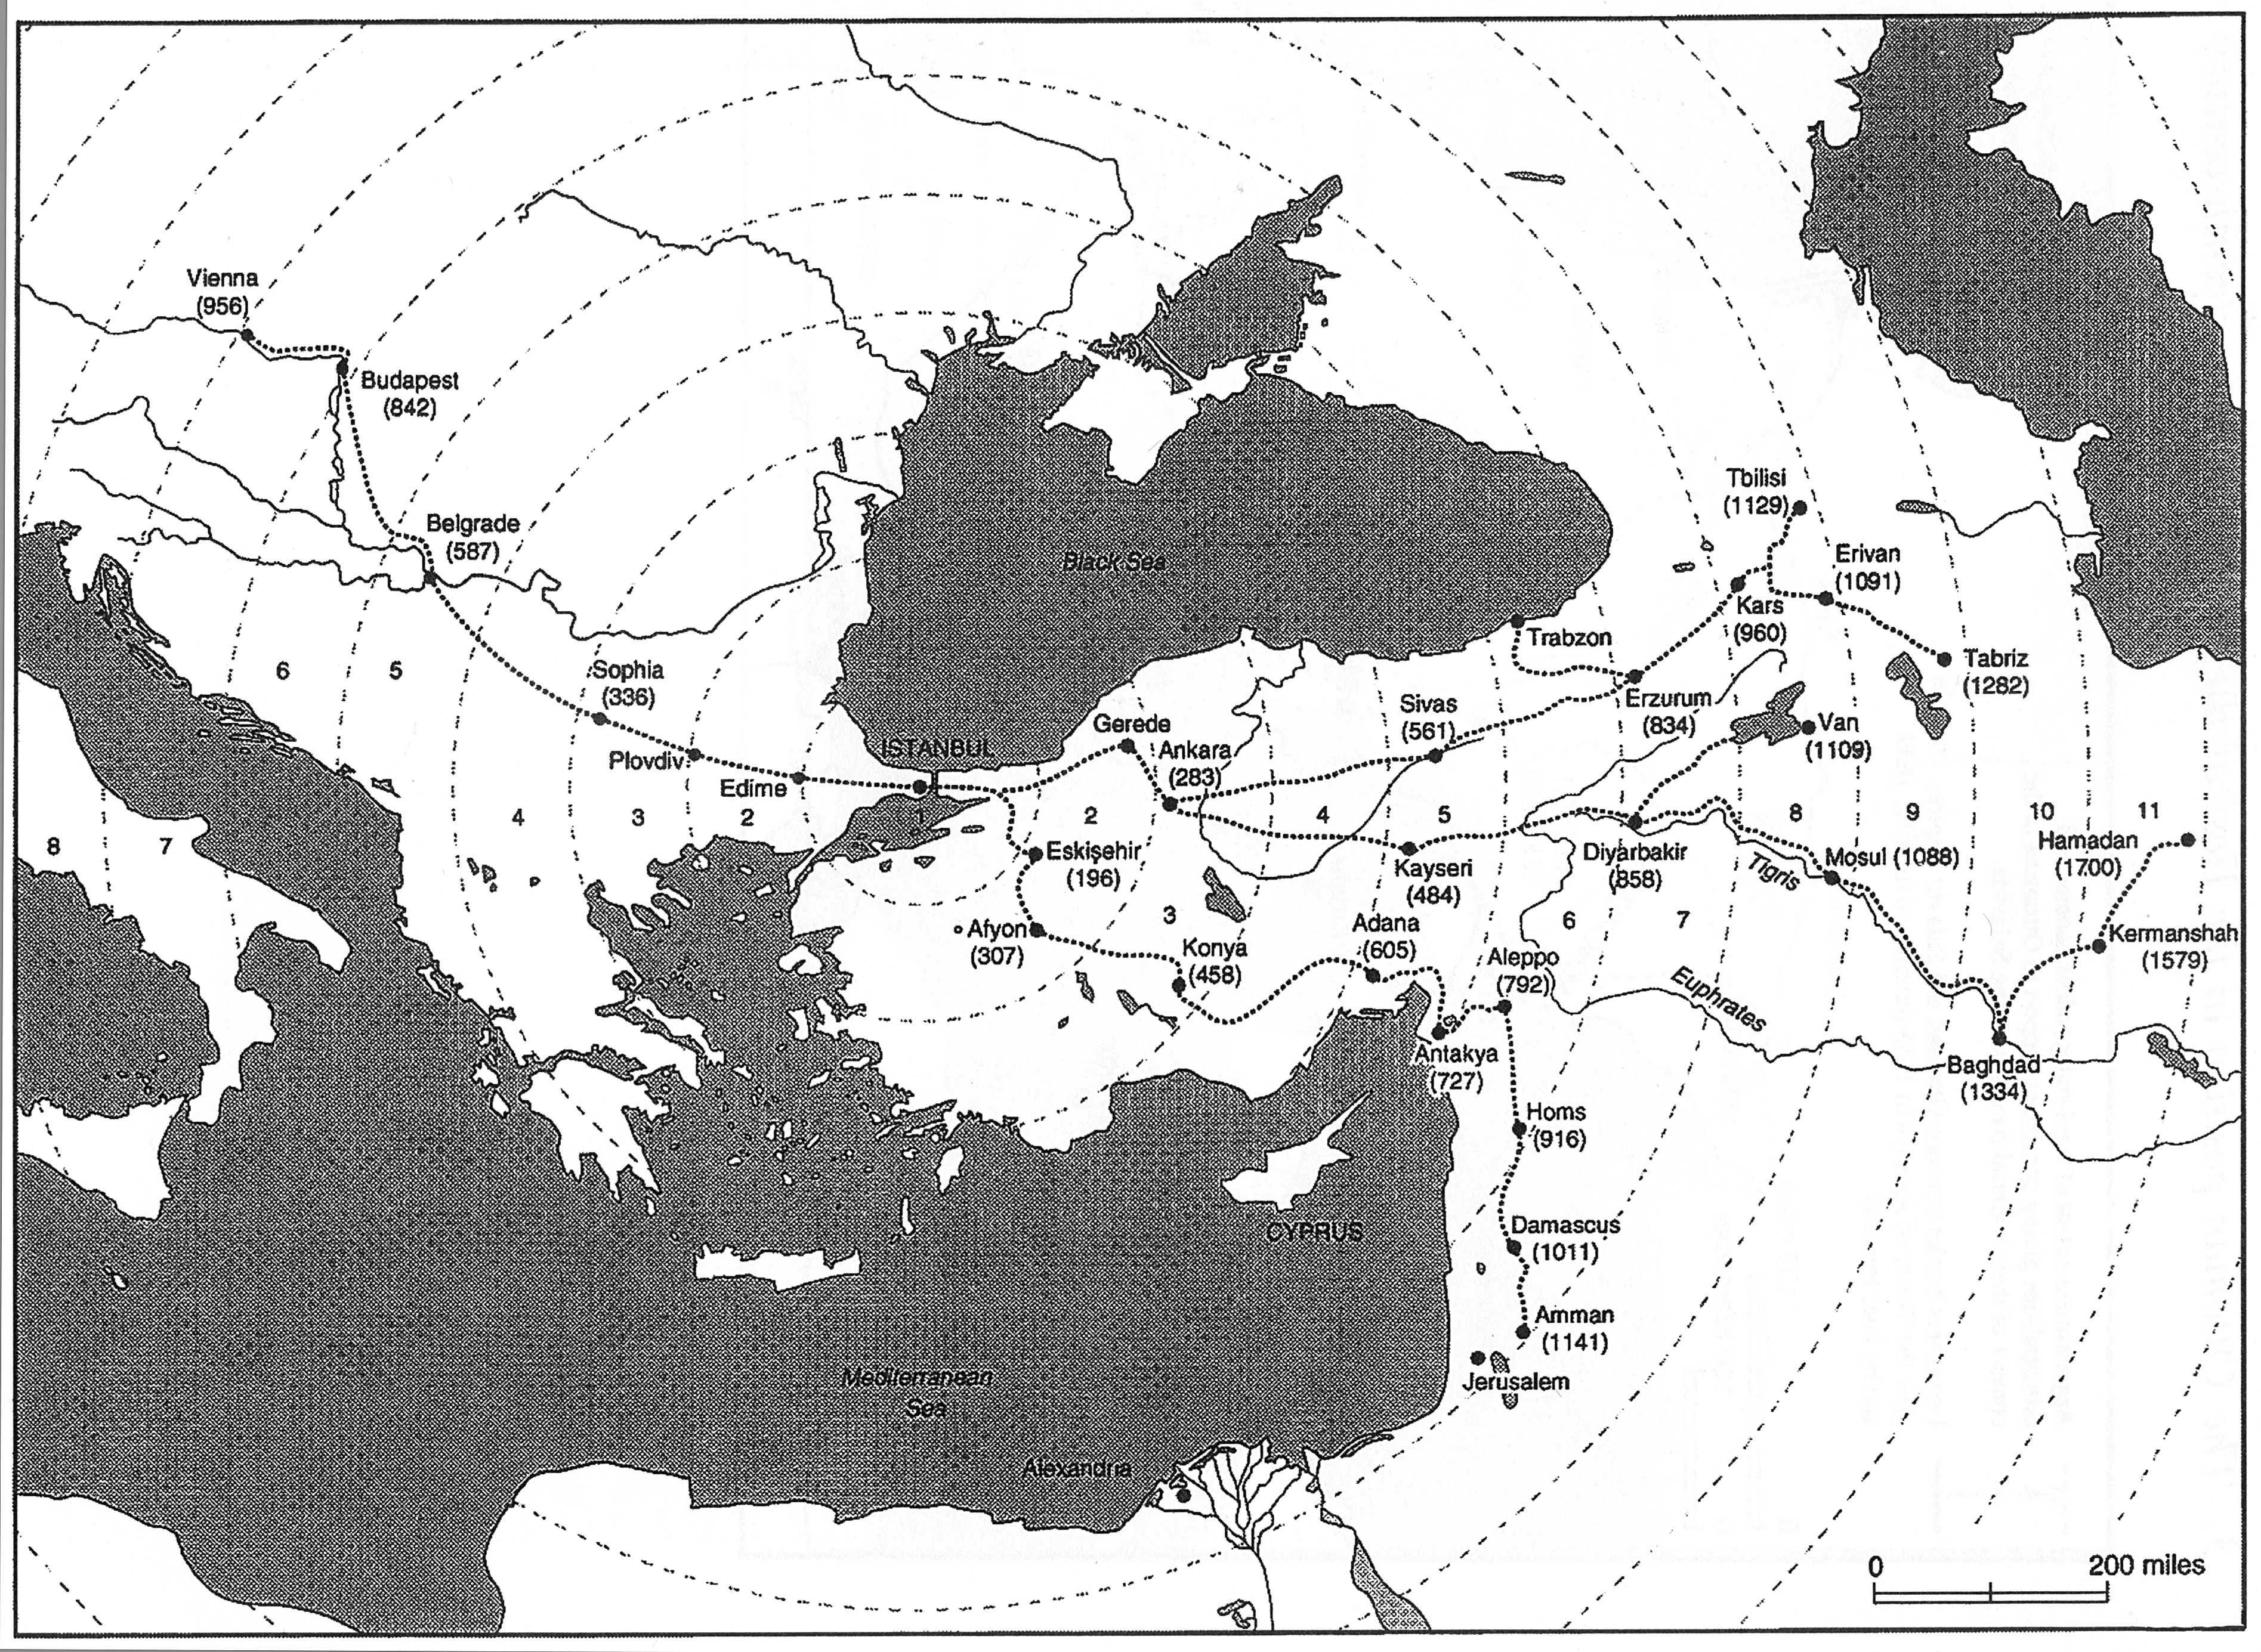 Imperial Geographies Anastasopoulos fig. 1